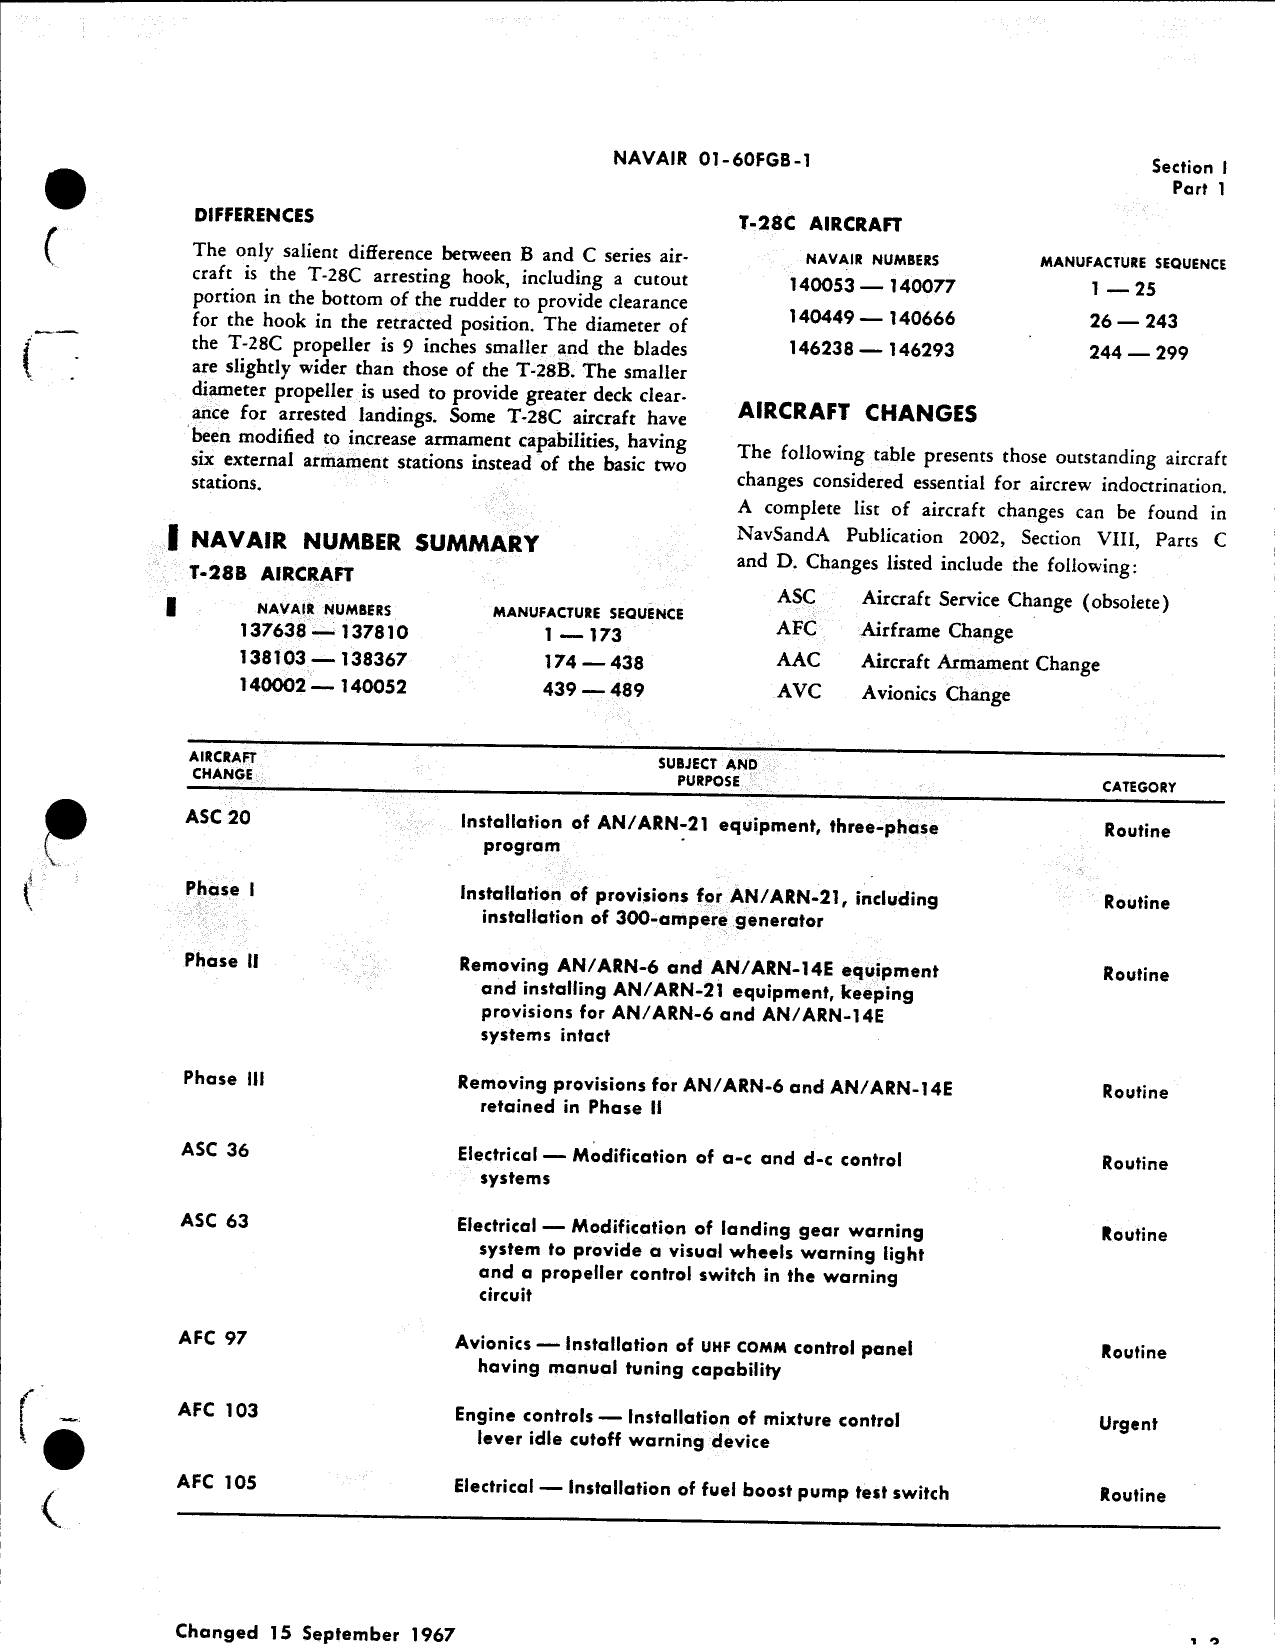 Sample page  4 from AirCorps Library document: Natops Flight Manual - T-28B T-28C